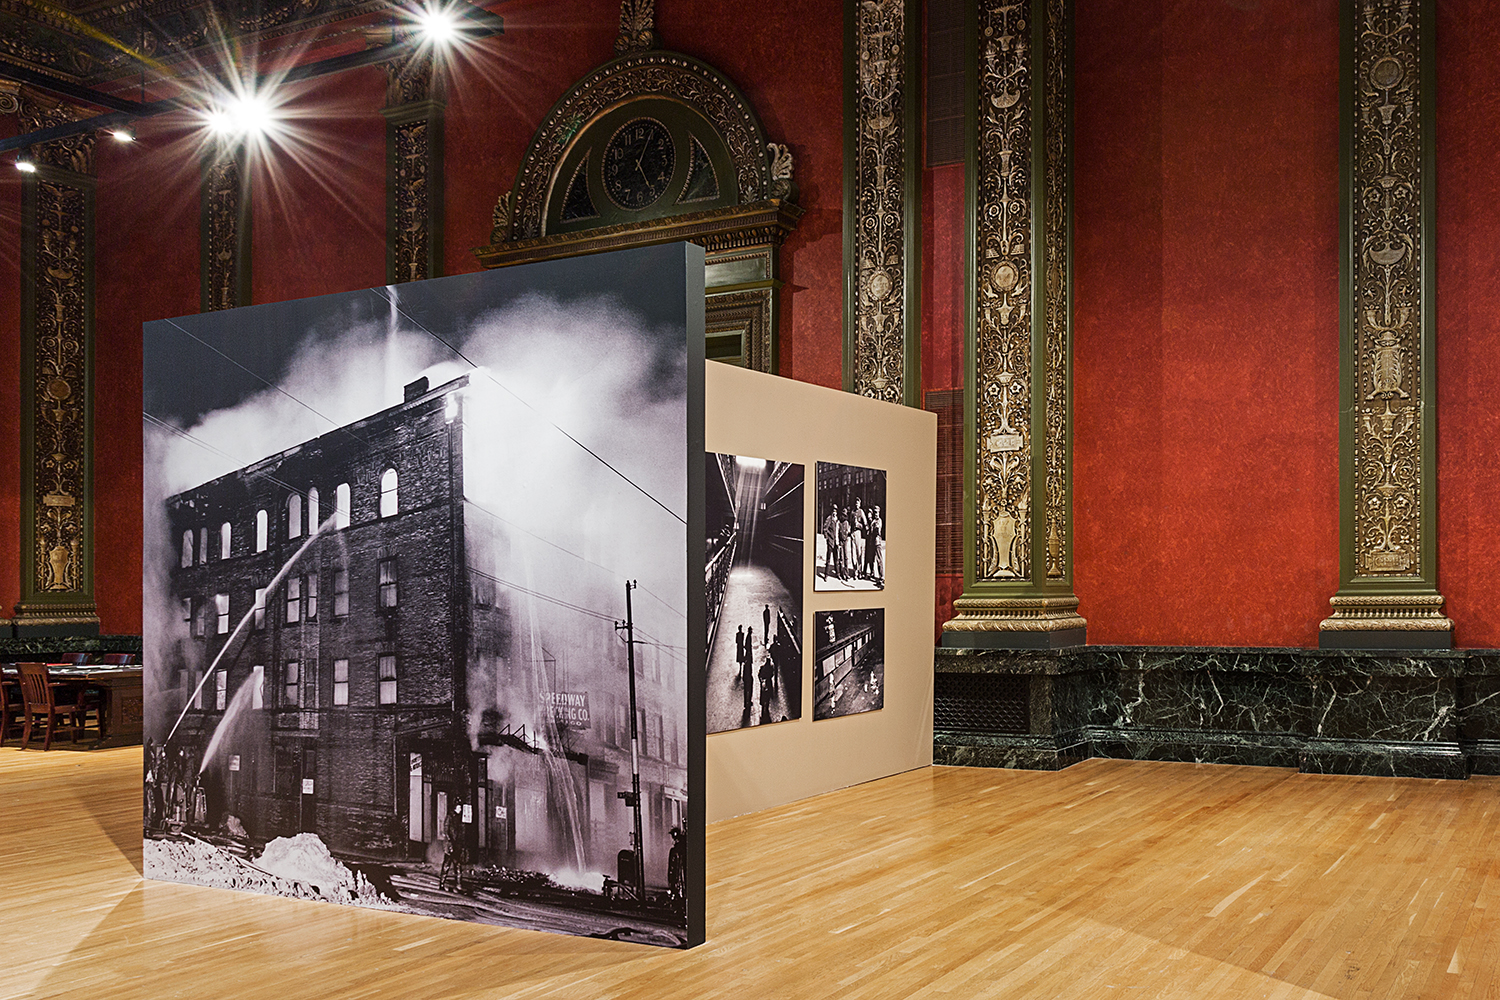 Mecca Flat Blues / Chicago Cultural Center / Chicago IL / Curator: Tim Samuelson / 2014